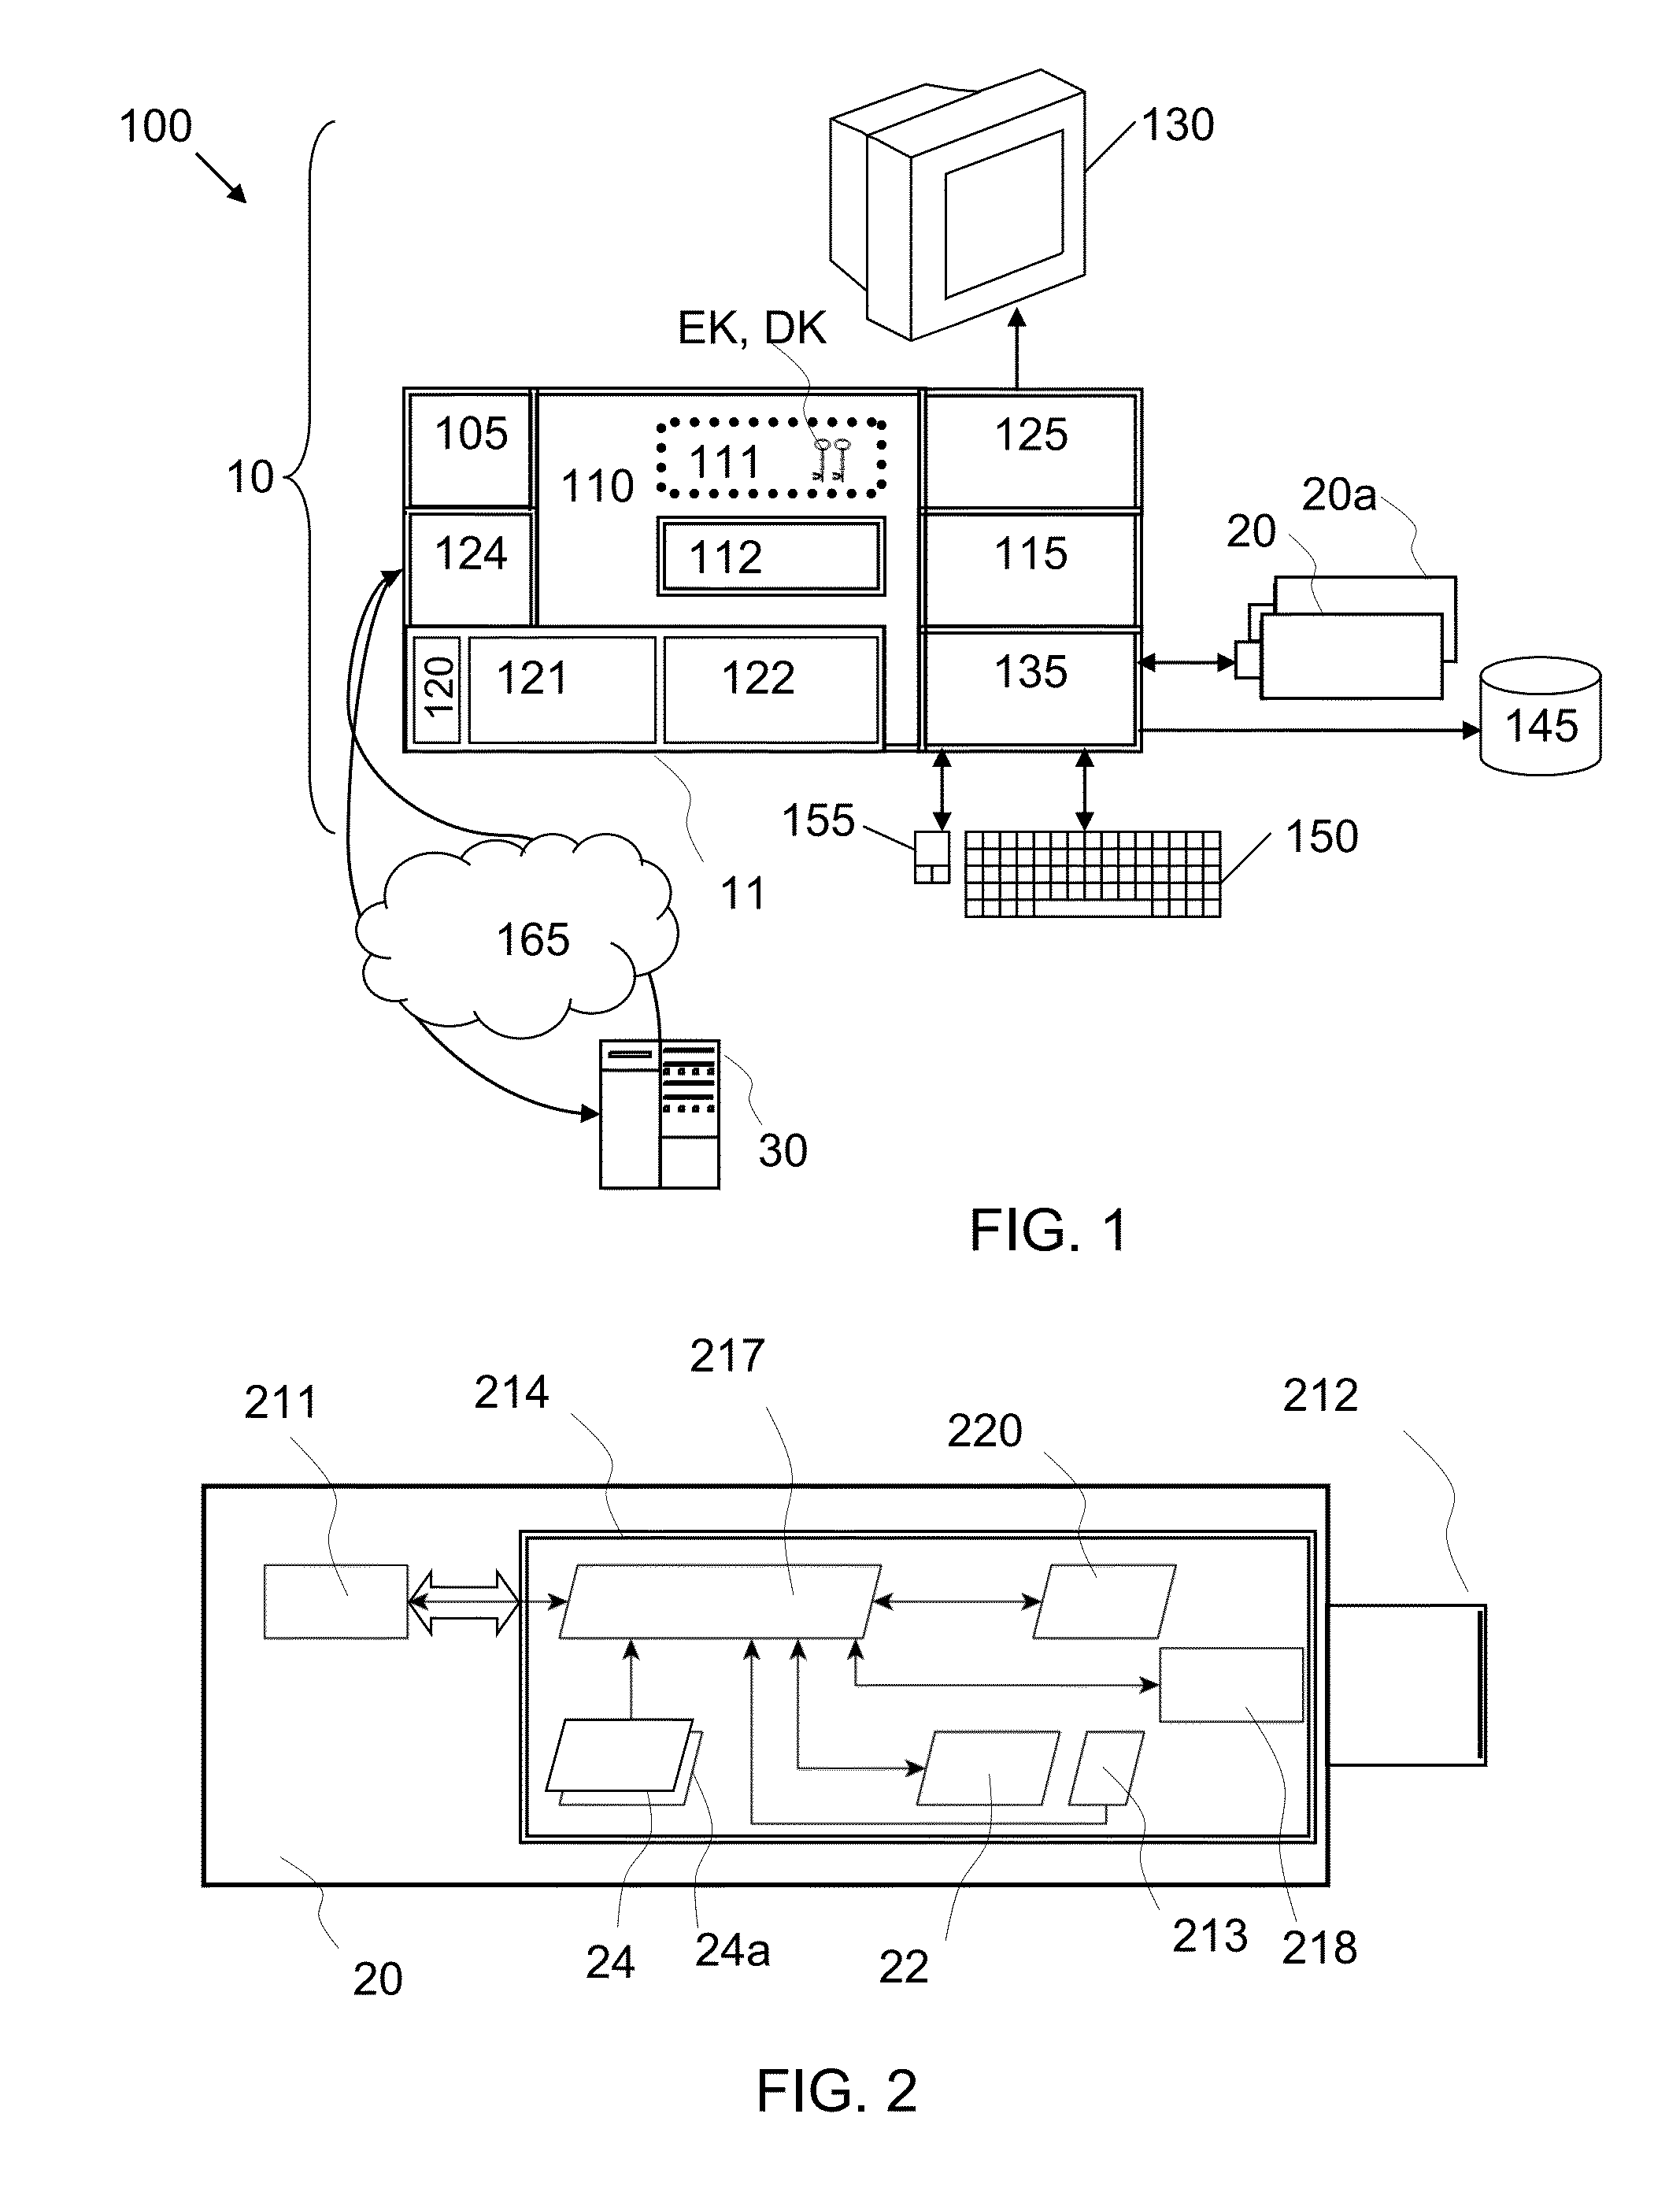 Enabling an external operating system to access encrypted data units of a data storage system